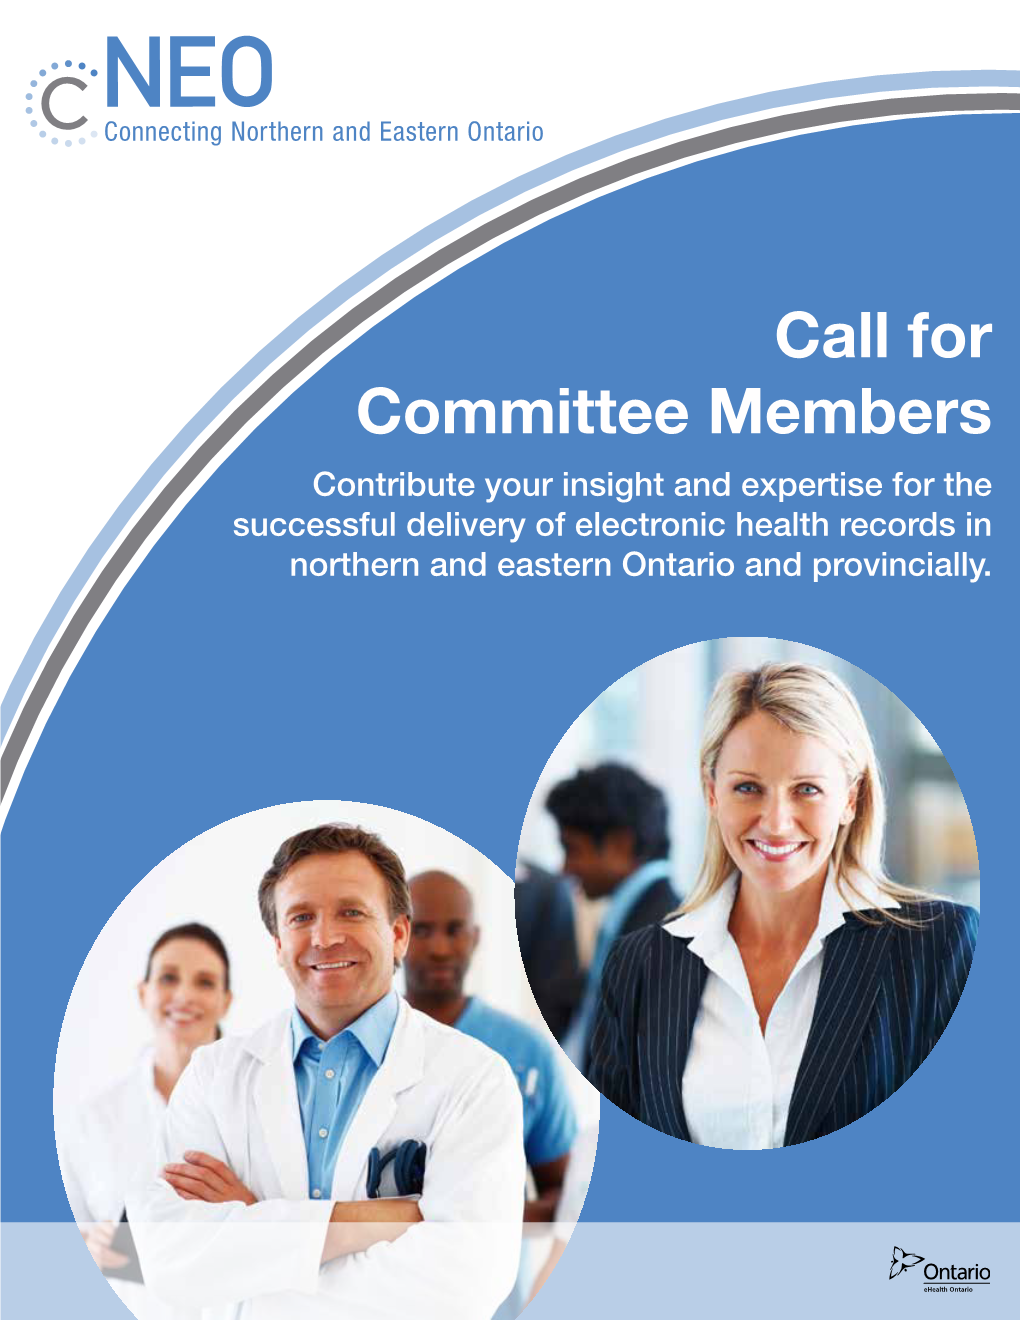 Call for Committee Members